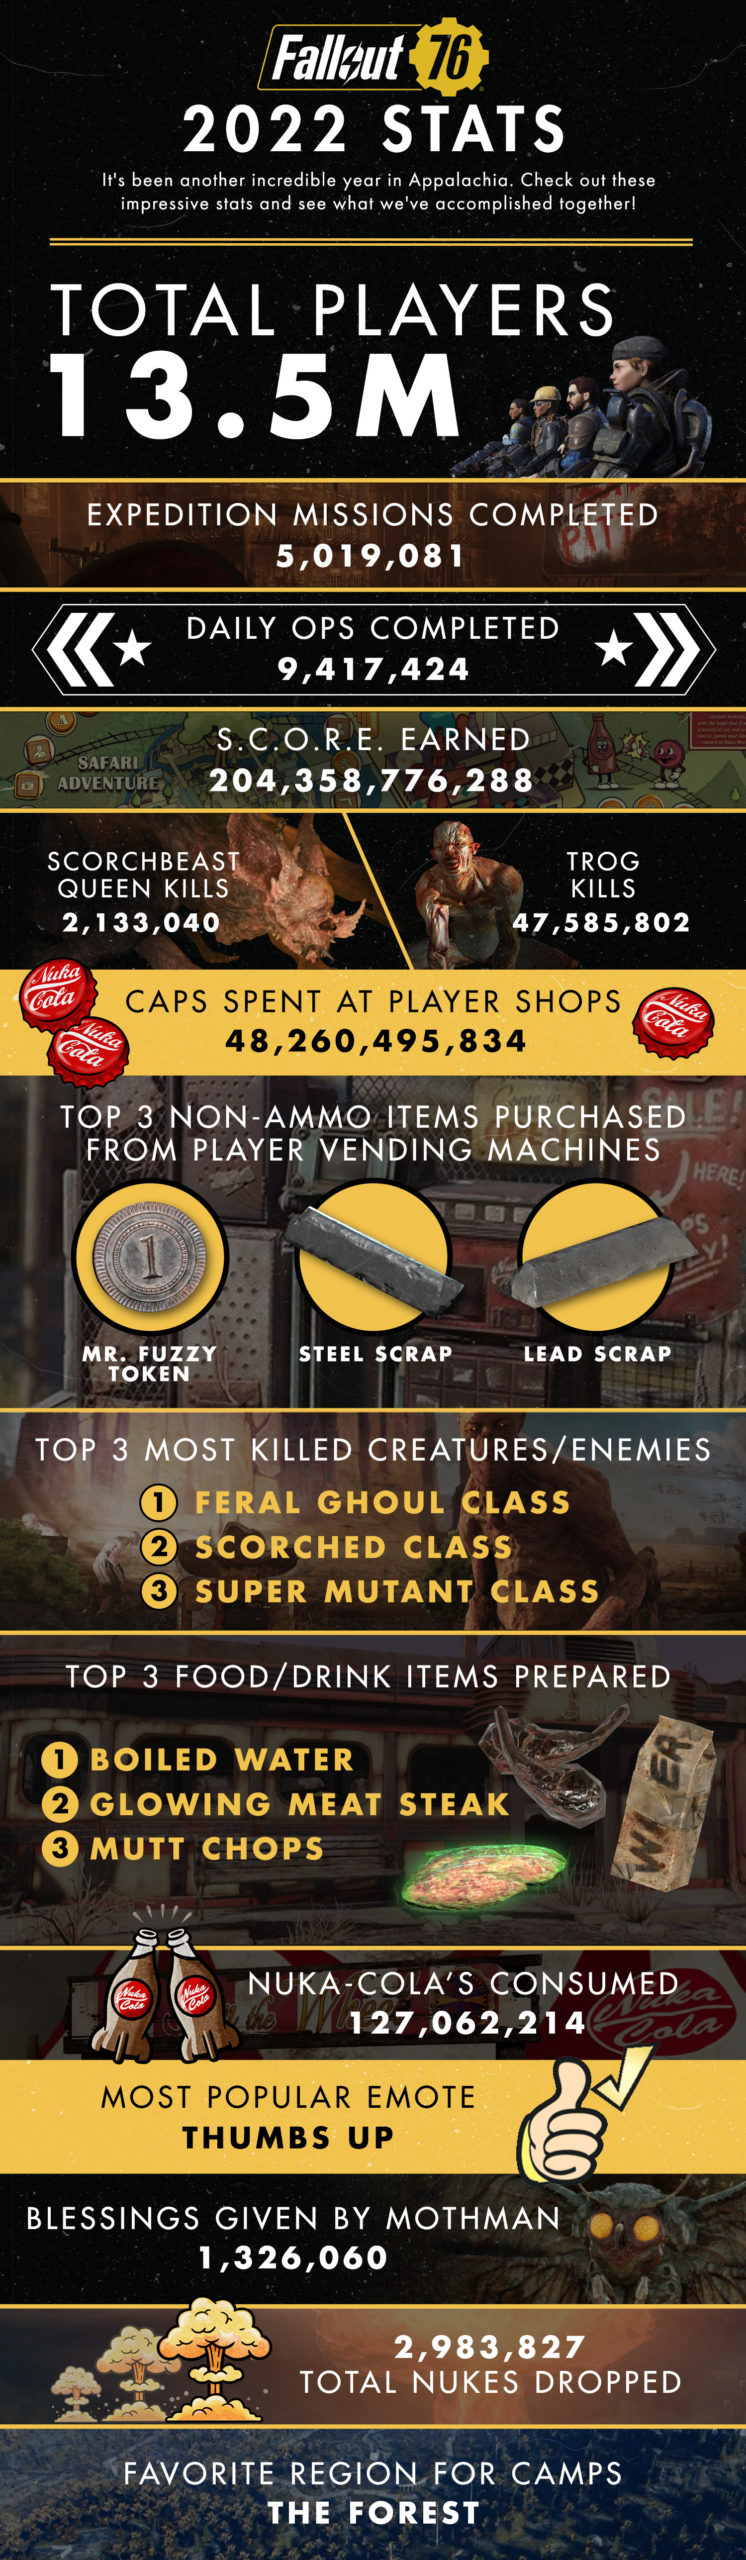 Fallout 76 Infographic